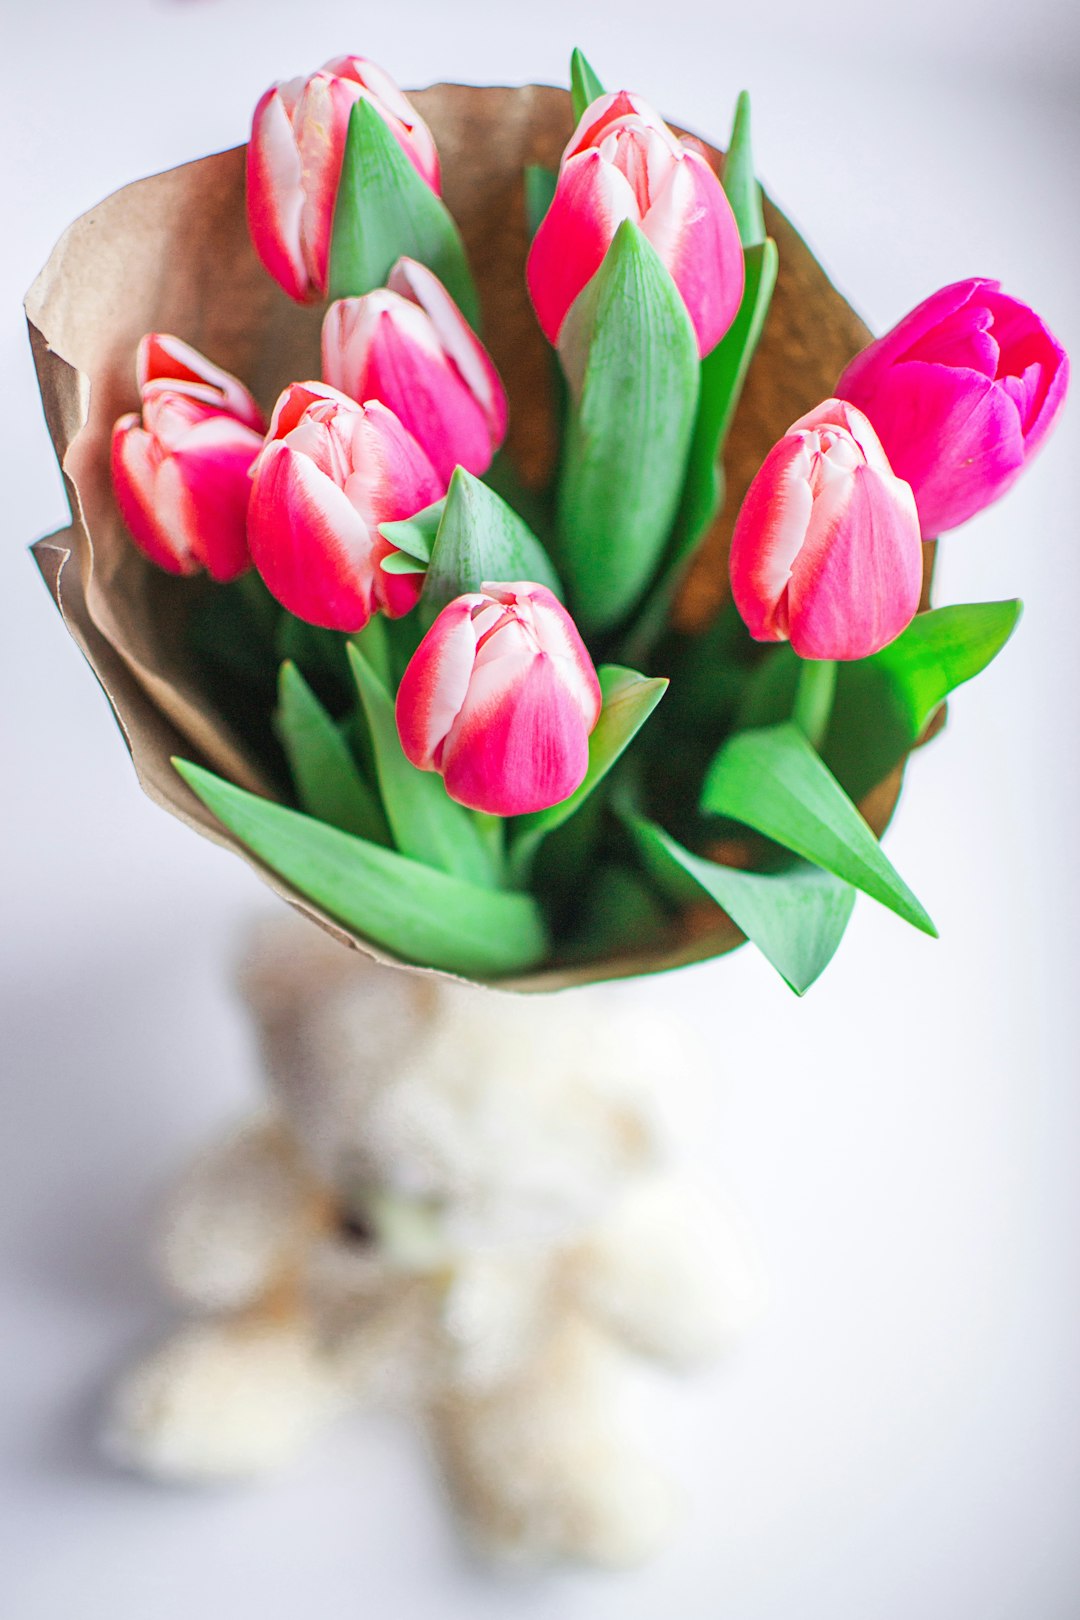 Beautiful fresh morning pink bouquet of tulips on the window. Fragrant smell of fresh spring tulips in a paper wrapper